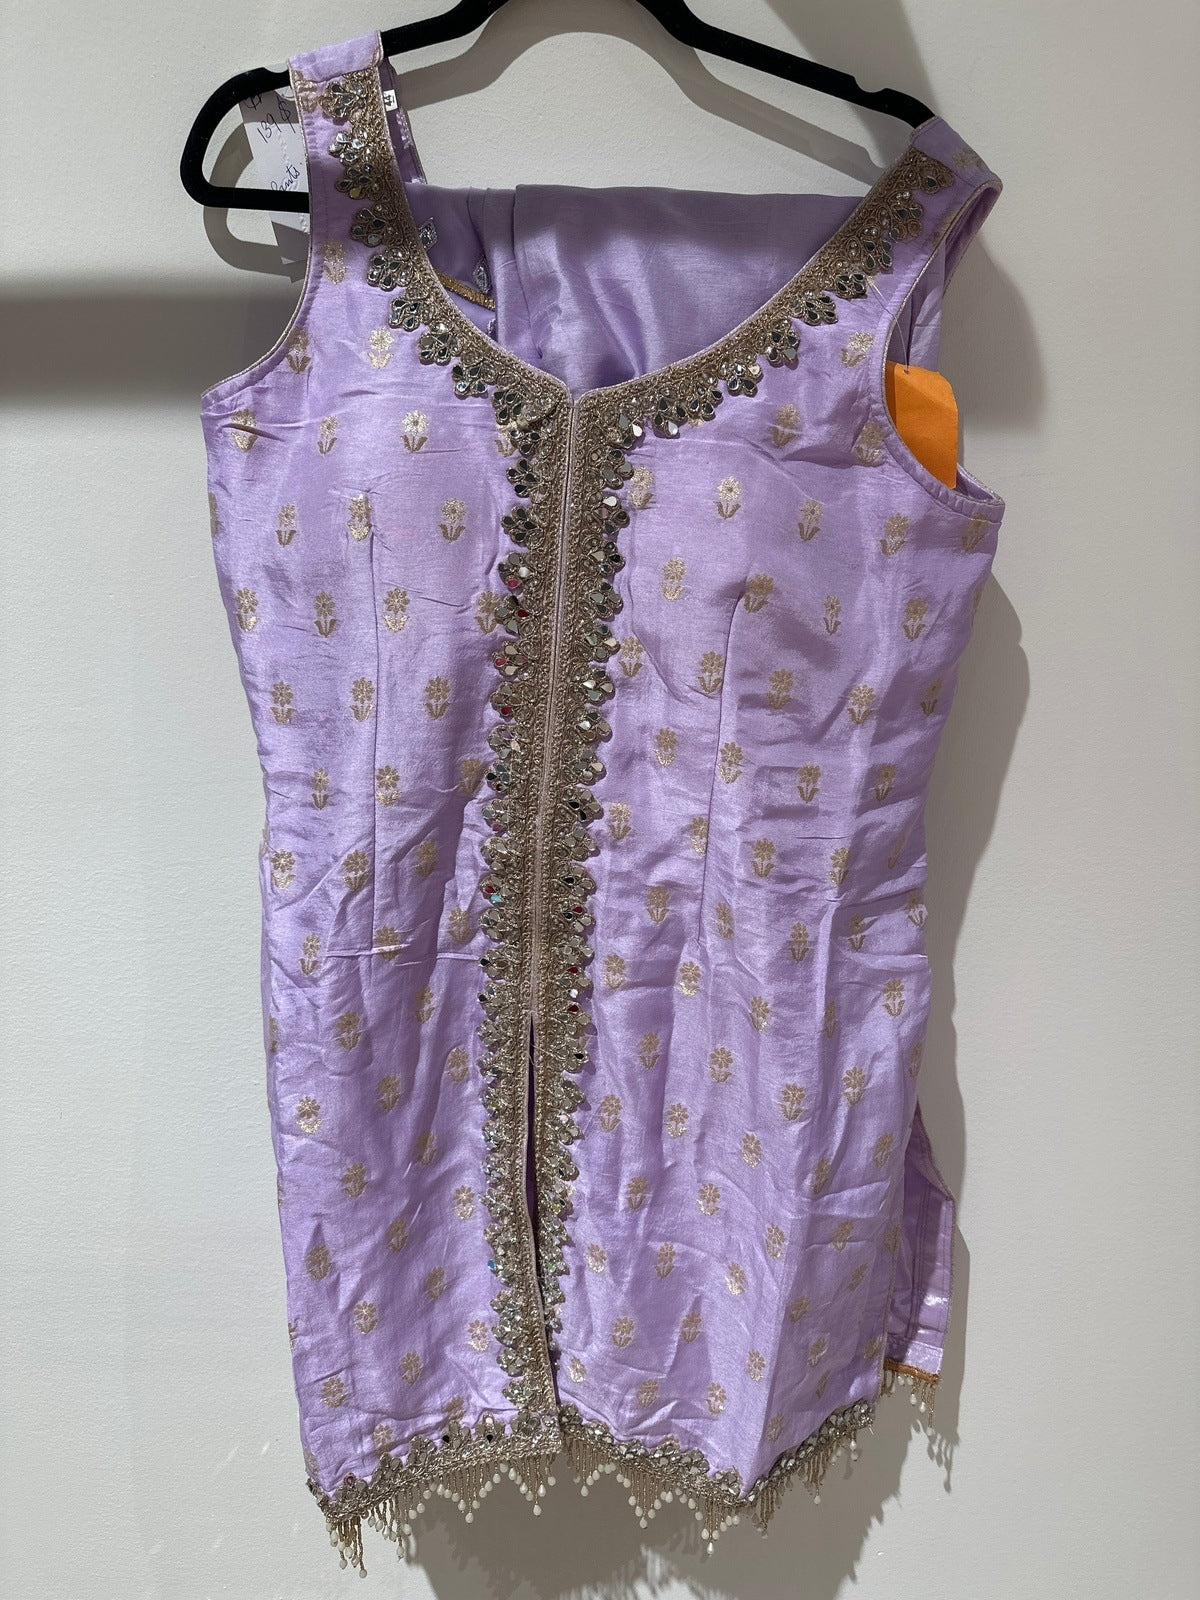 Lavender Shirt Pant Outfit for Women